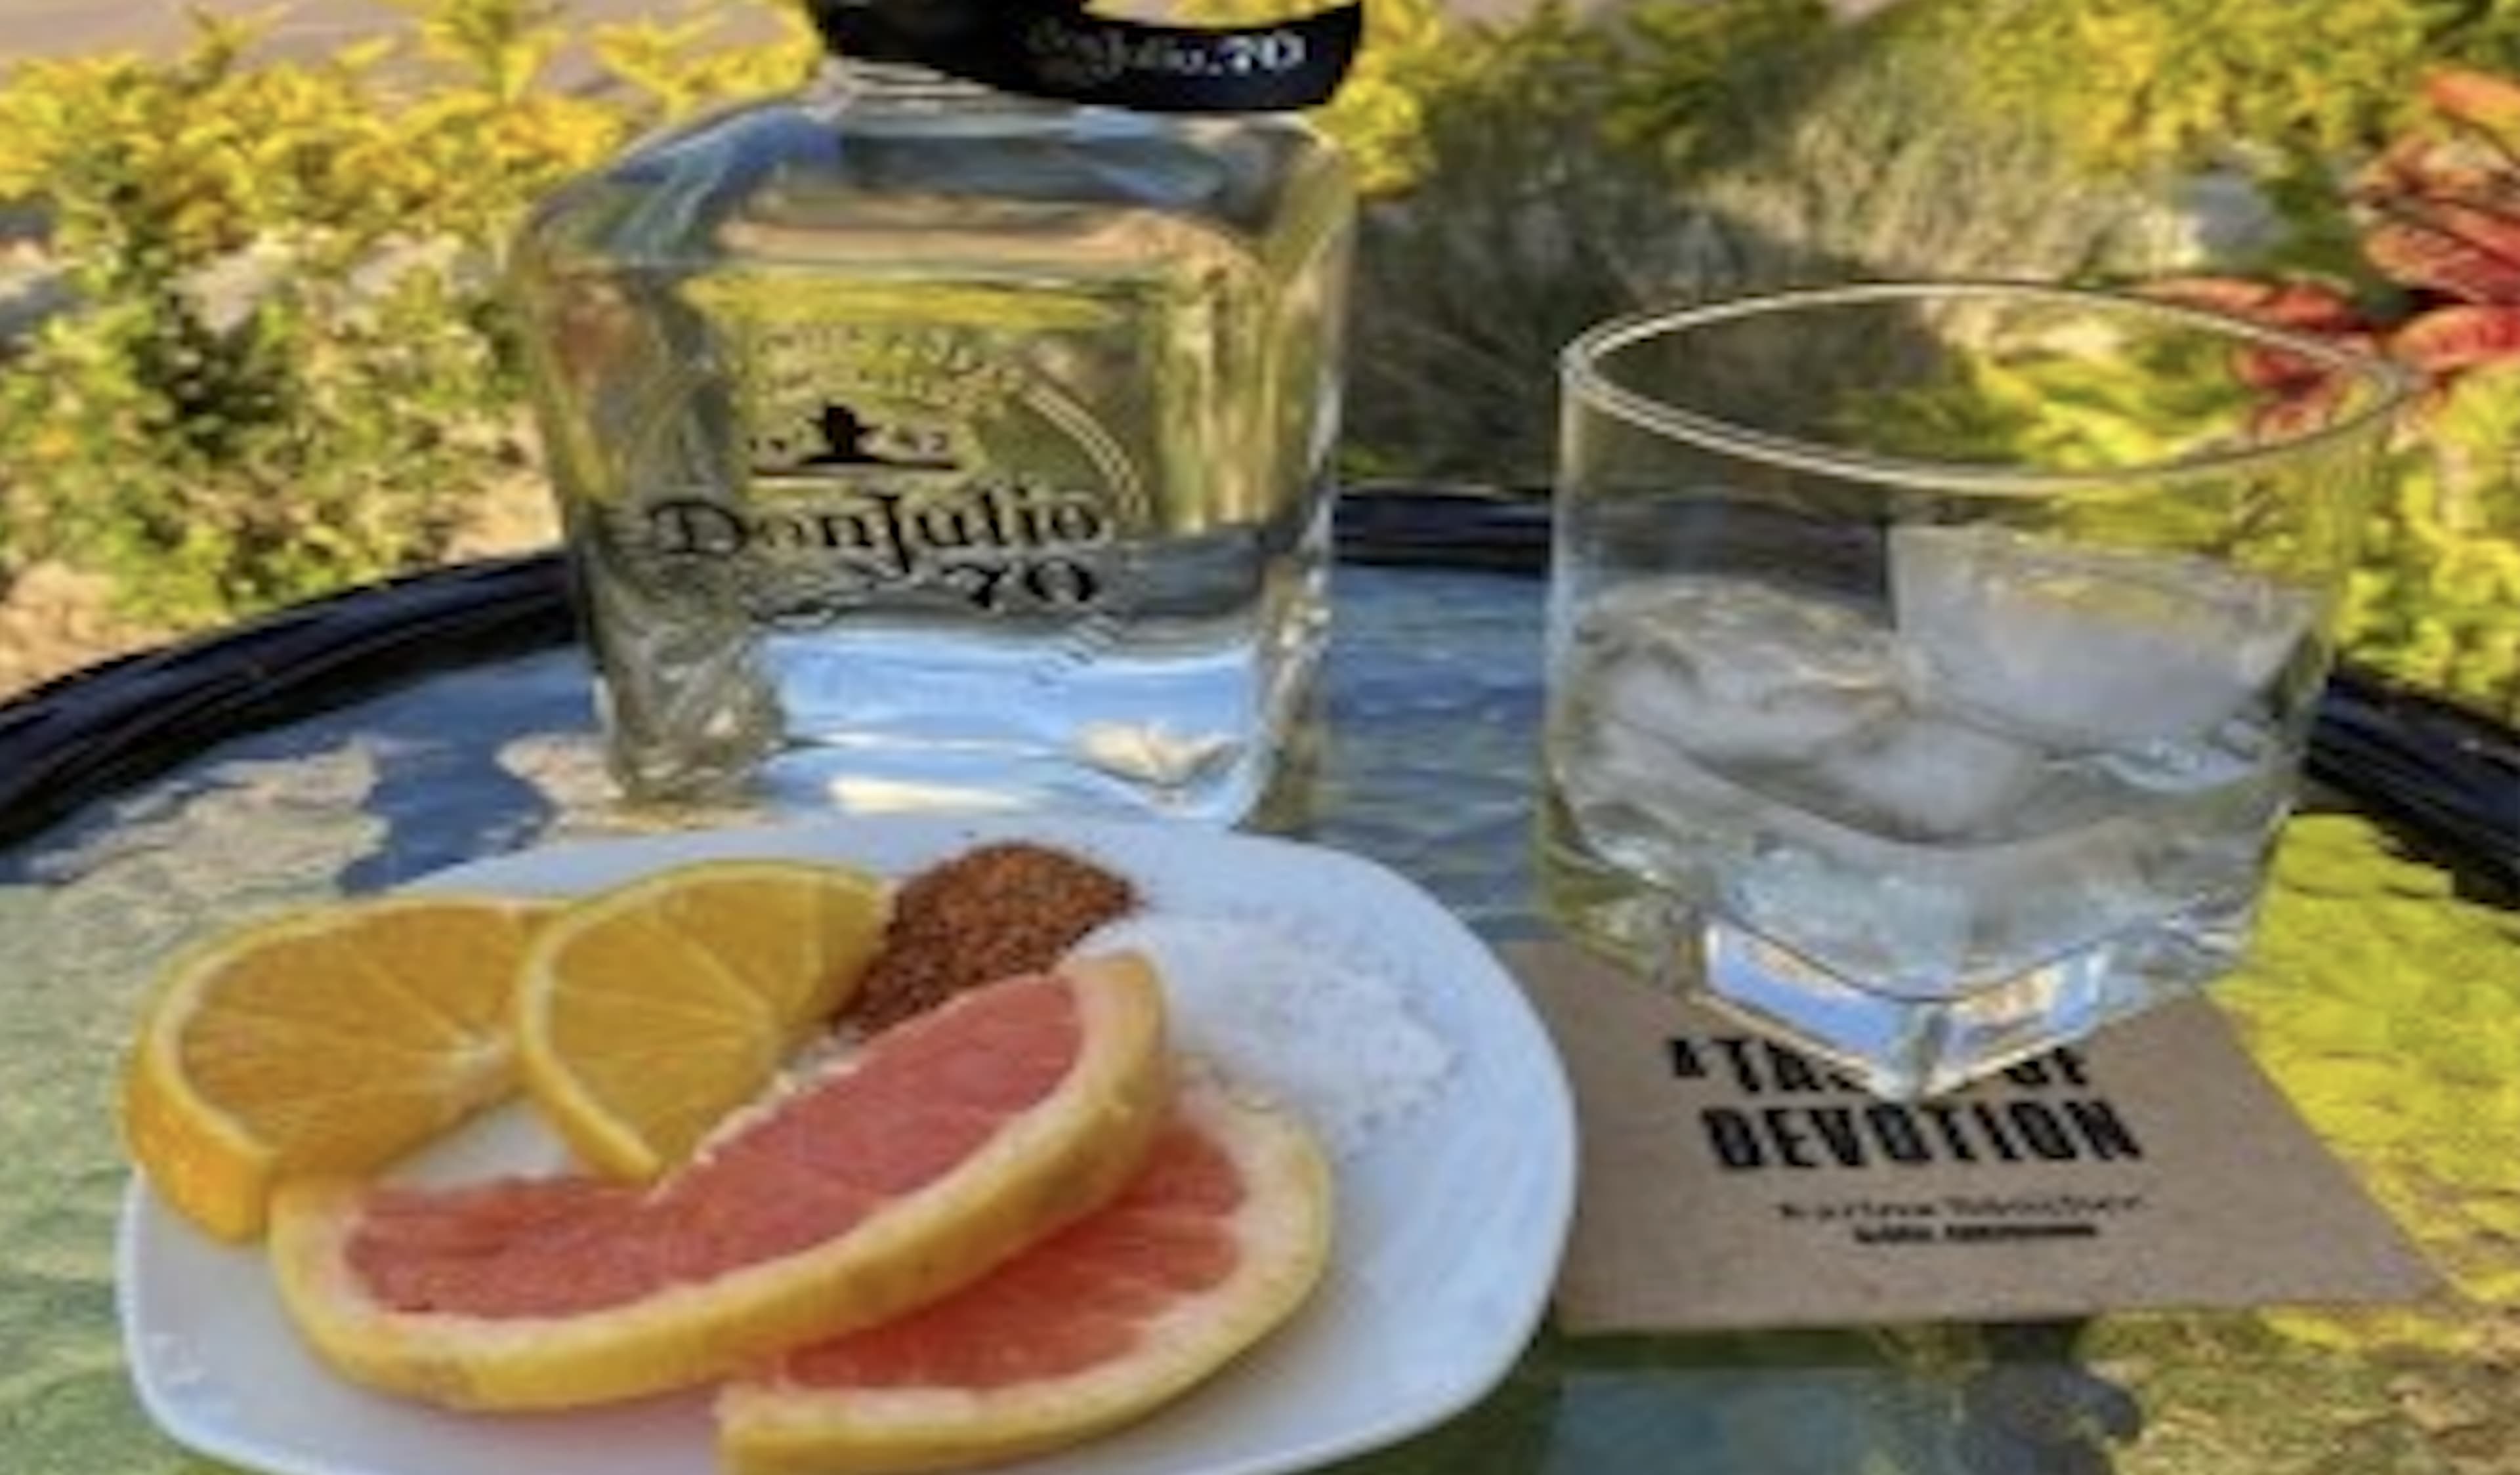 The Deconstructed Paloma with Don Julio 70 